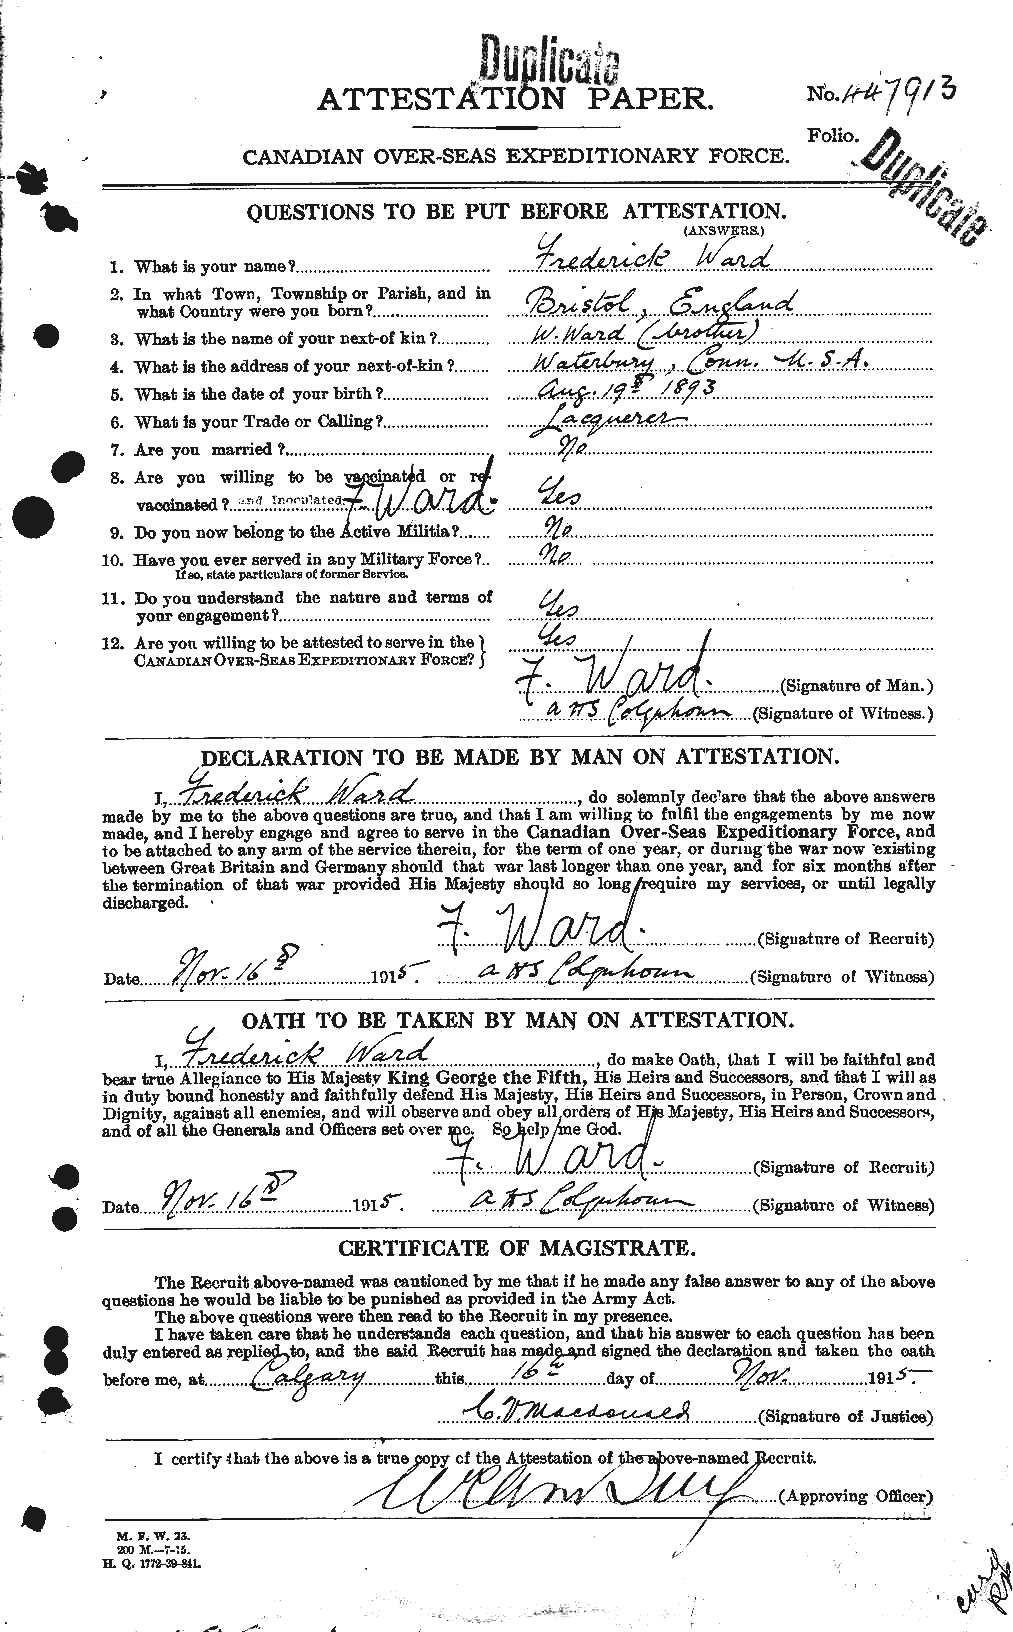 Personnel Records of the First World War - CEF 657719a